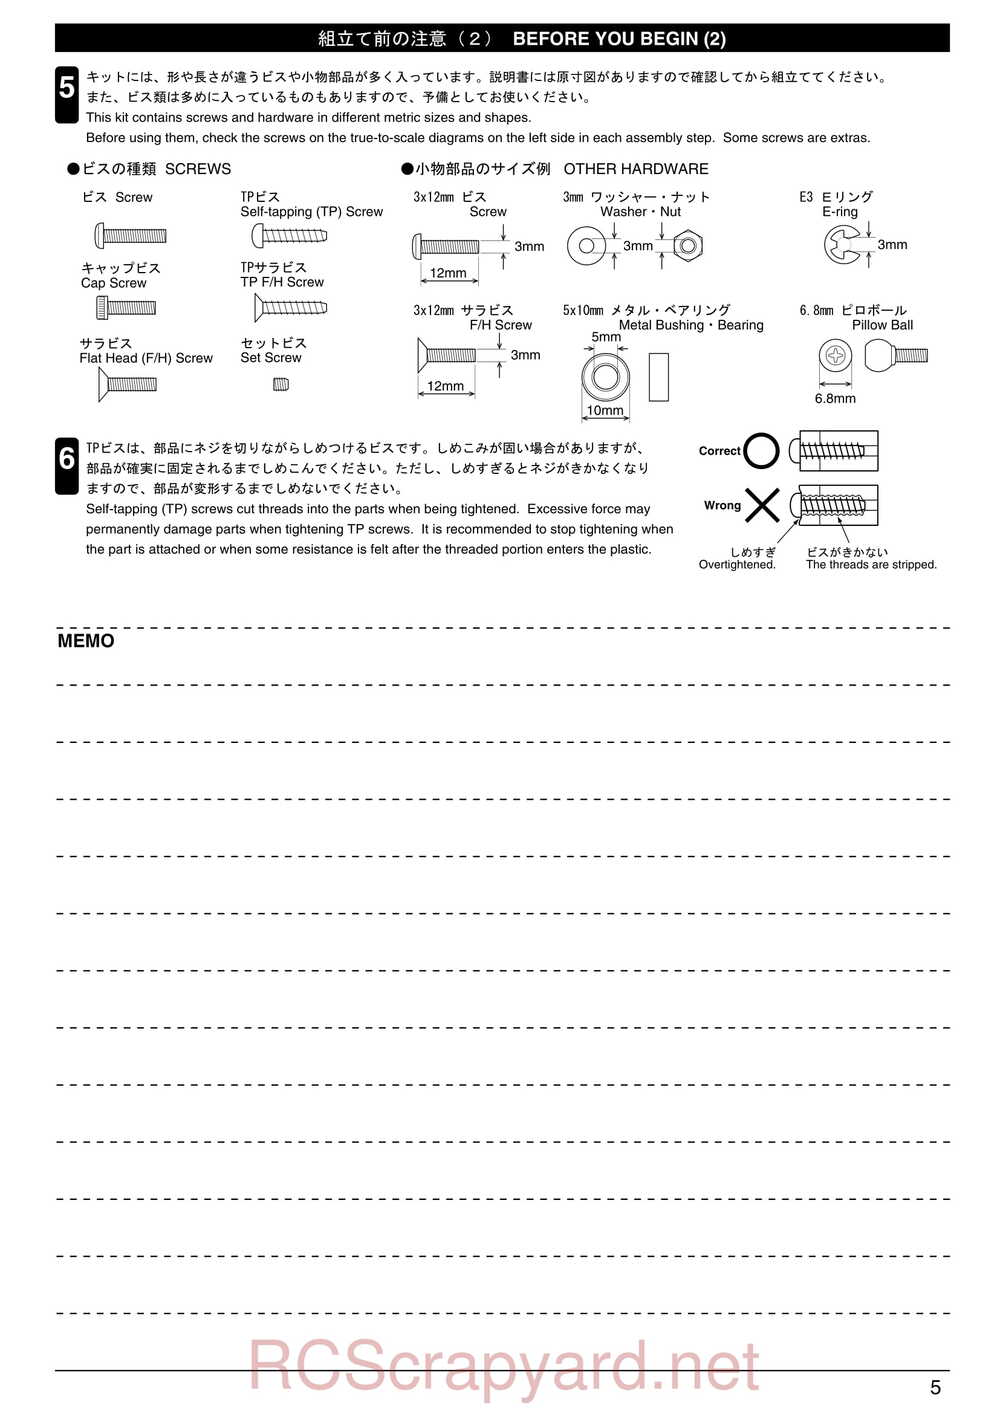 Kyosho - 31224 - Mad-Armour - Manual - Page 05